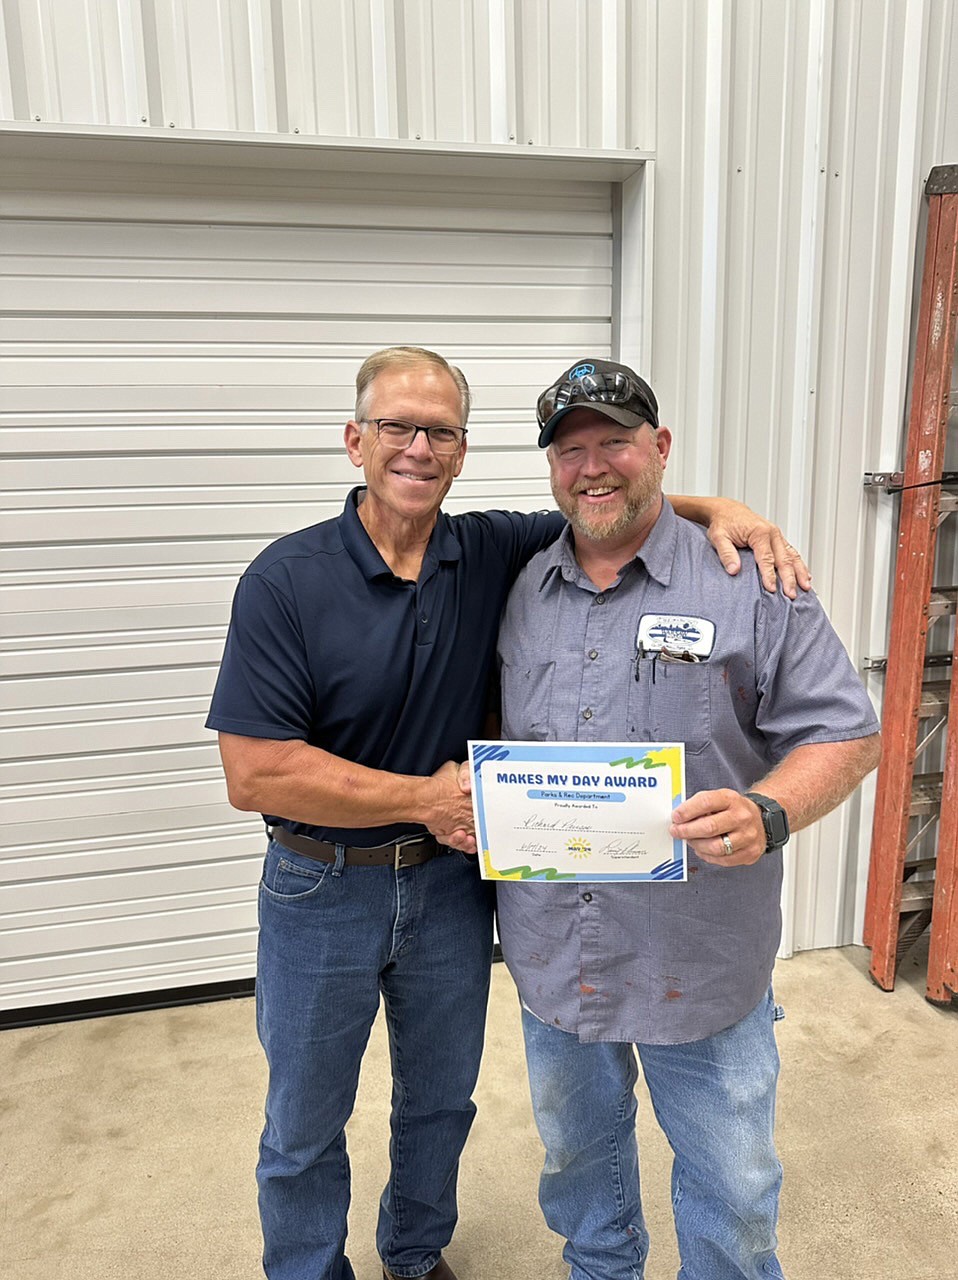 Warsaw Parks and Recreation Department employee Richard Pierson (R) won the "Makes My Day Award" for May. With him is Warsaw Parks and Recreation Department Superintendent Larry Plummer. Photo Provided